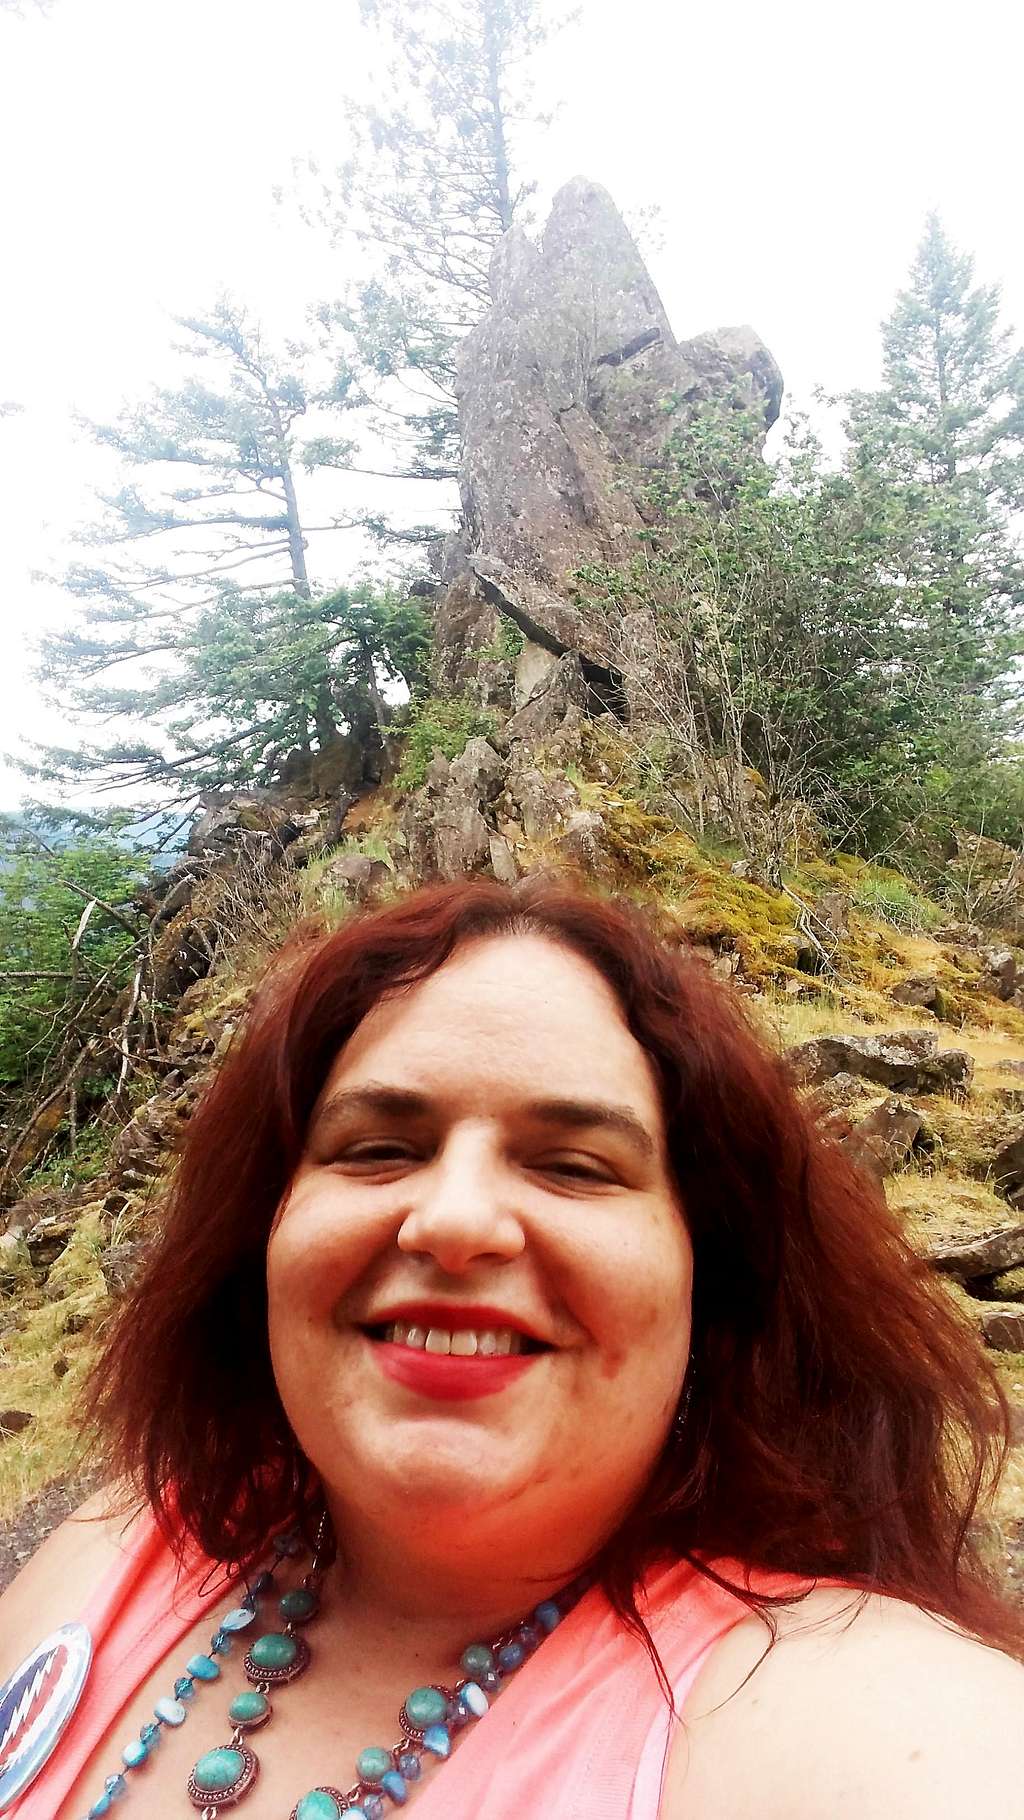 BearQueen is happiest in nature on small beautiful hikes like Little Beacon Rock...May 2016